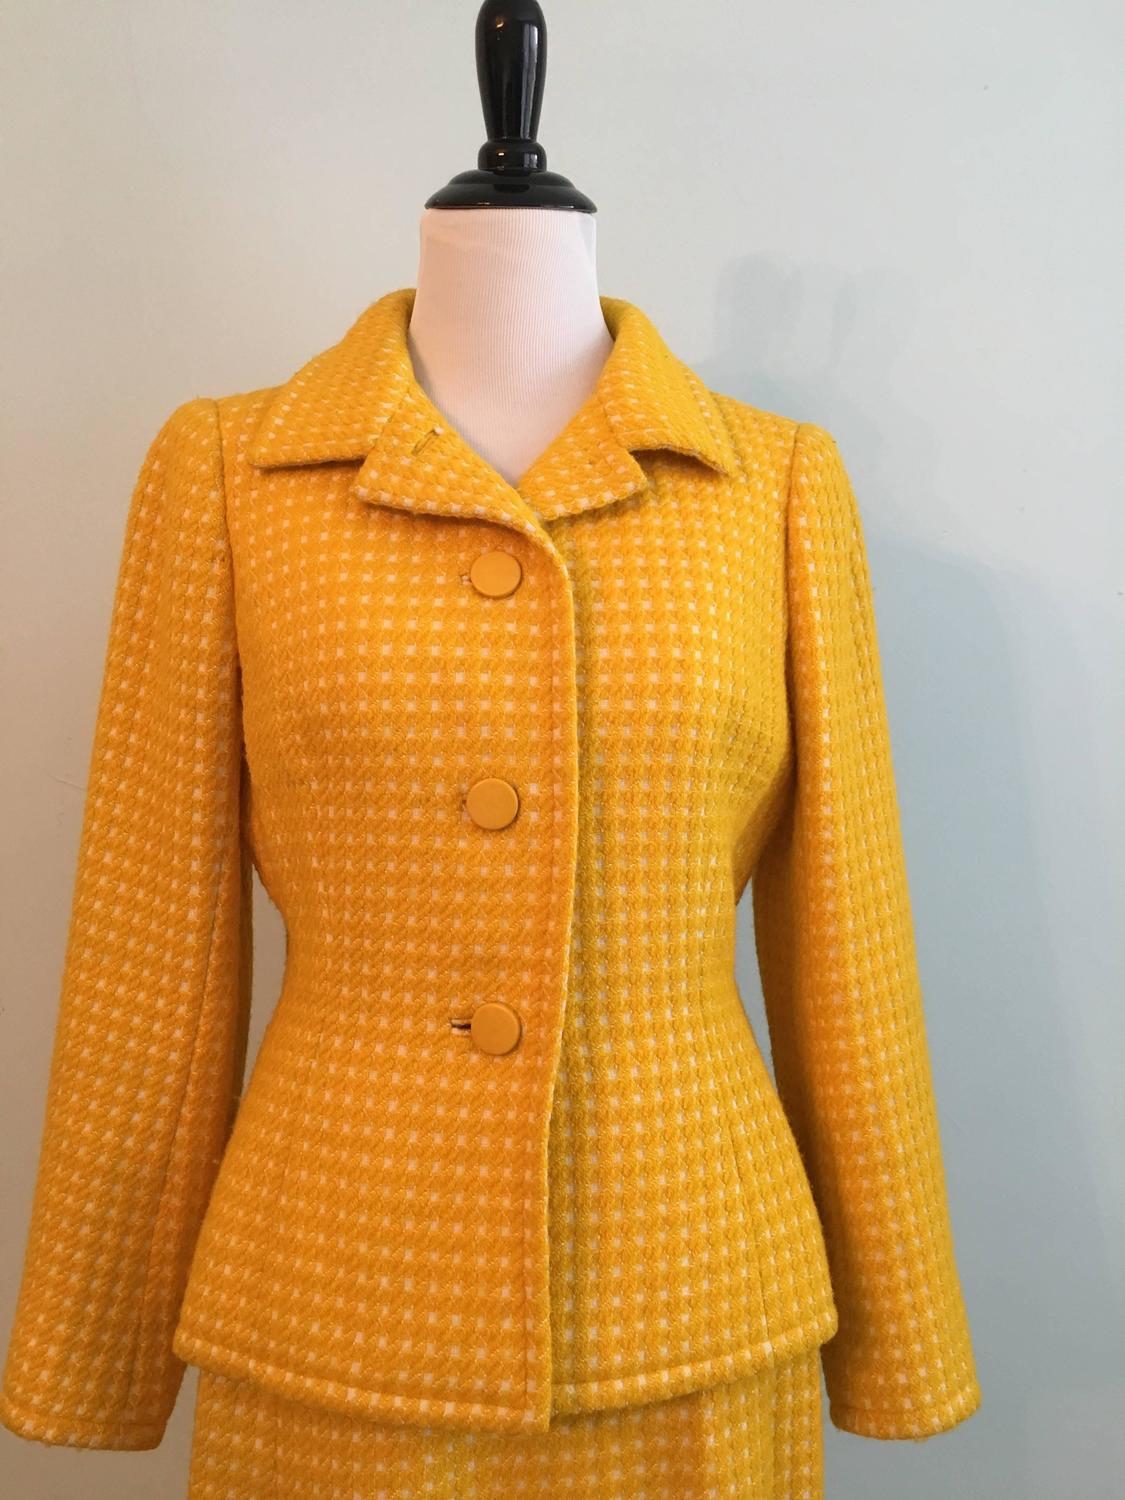 1960s Yellow Givenchy Two Piece Suit For Sale at 1stdibs